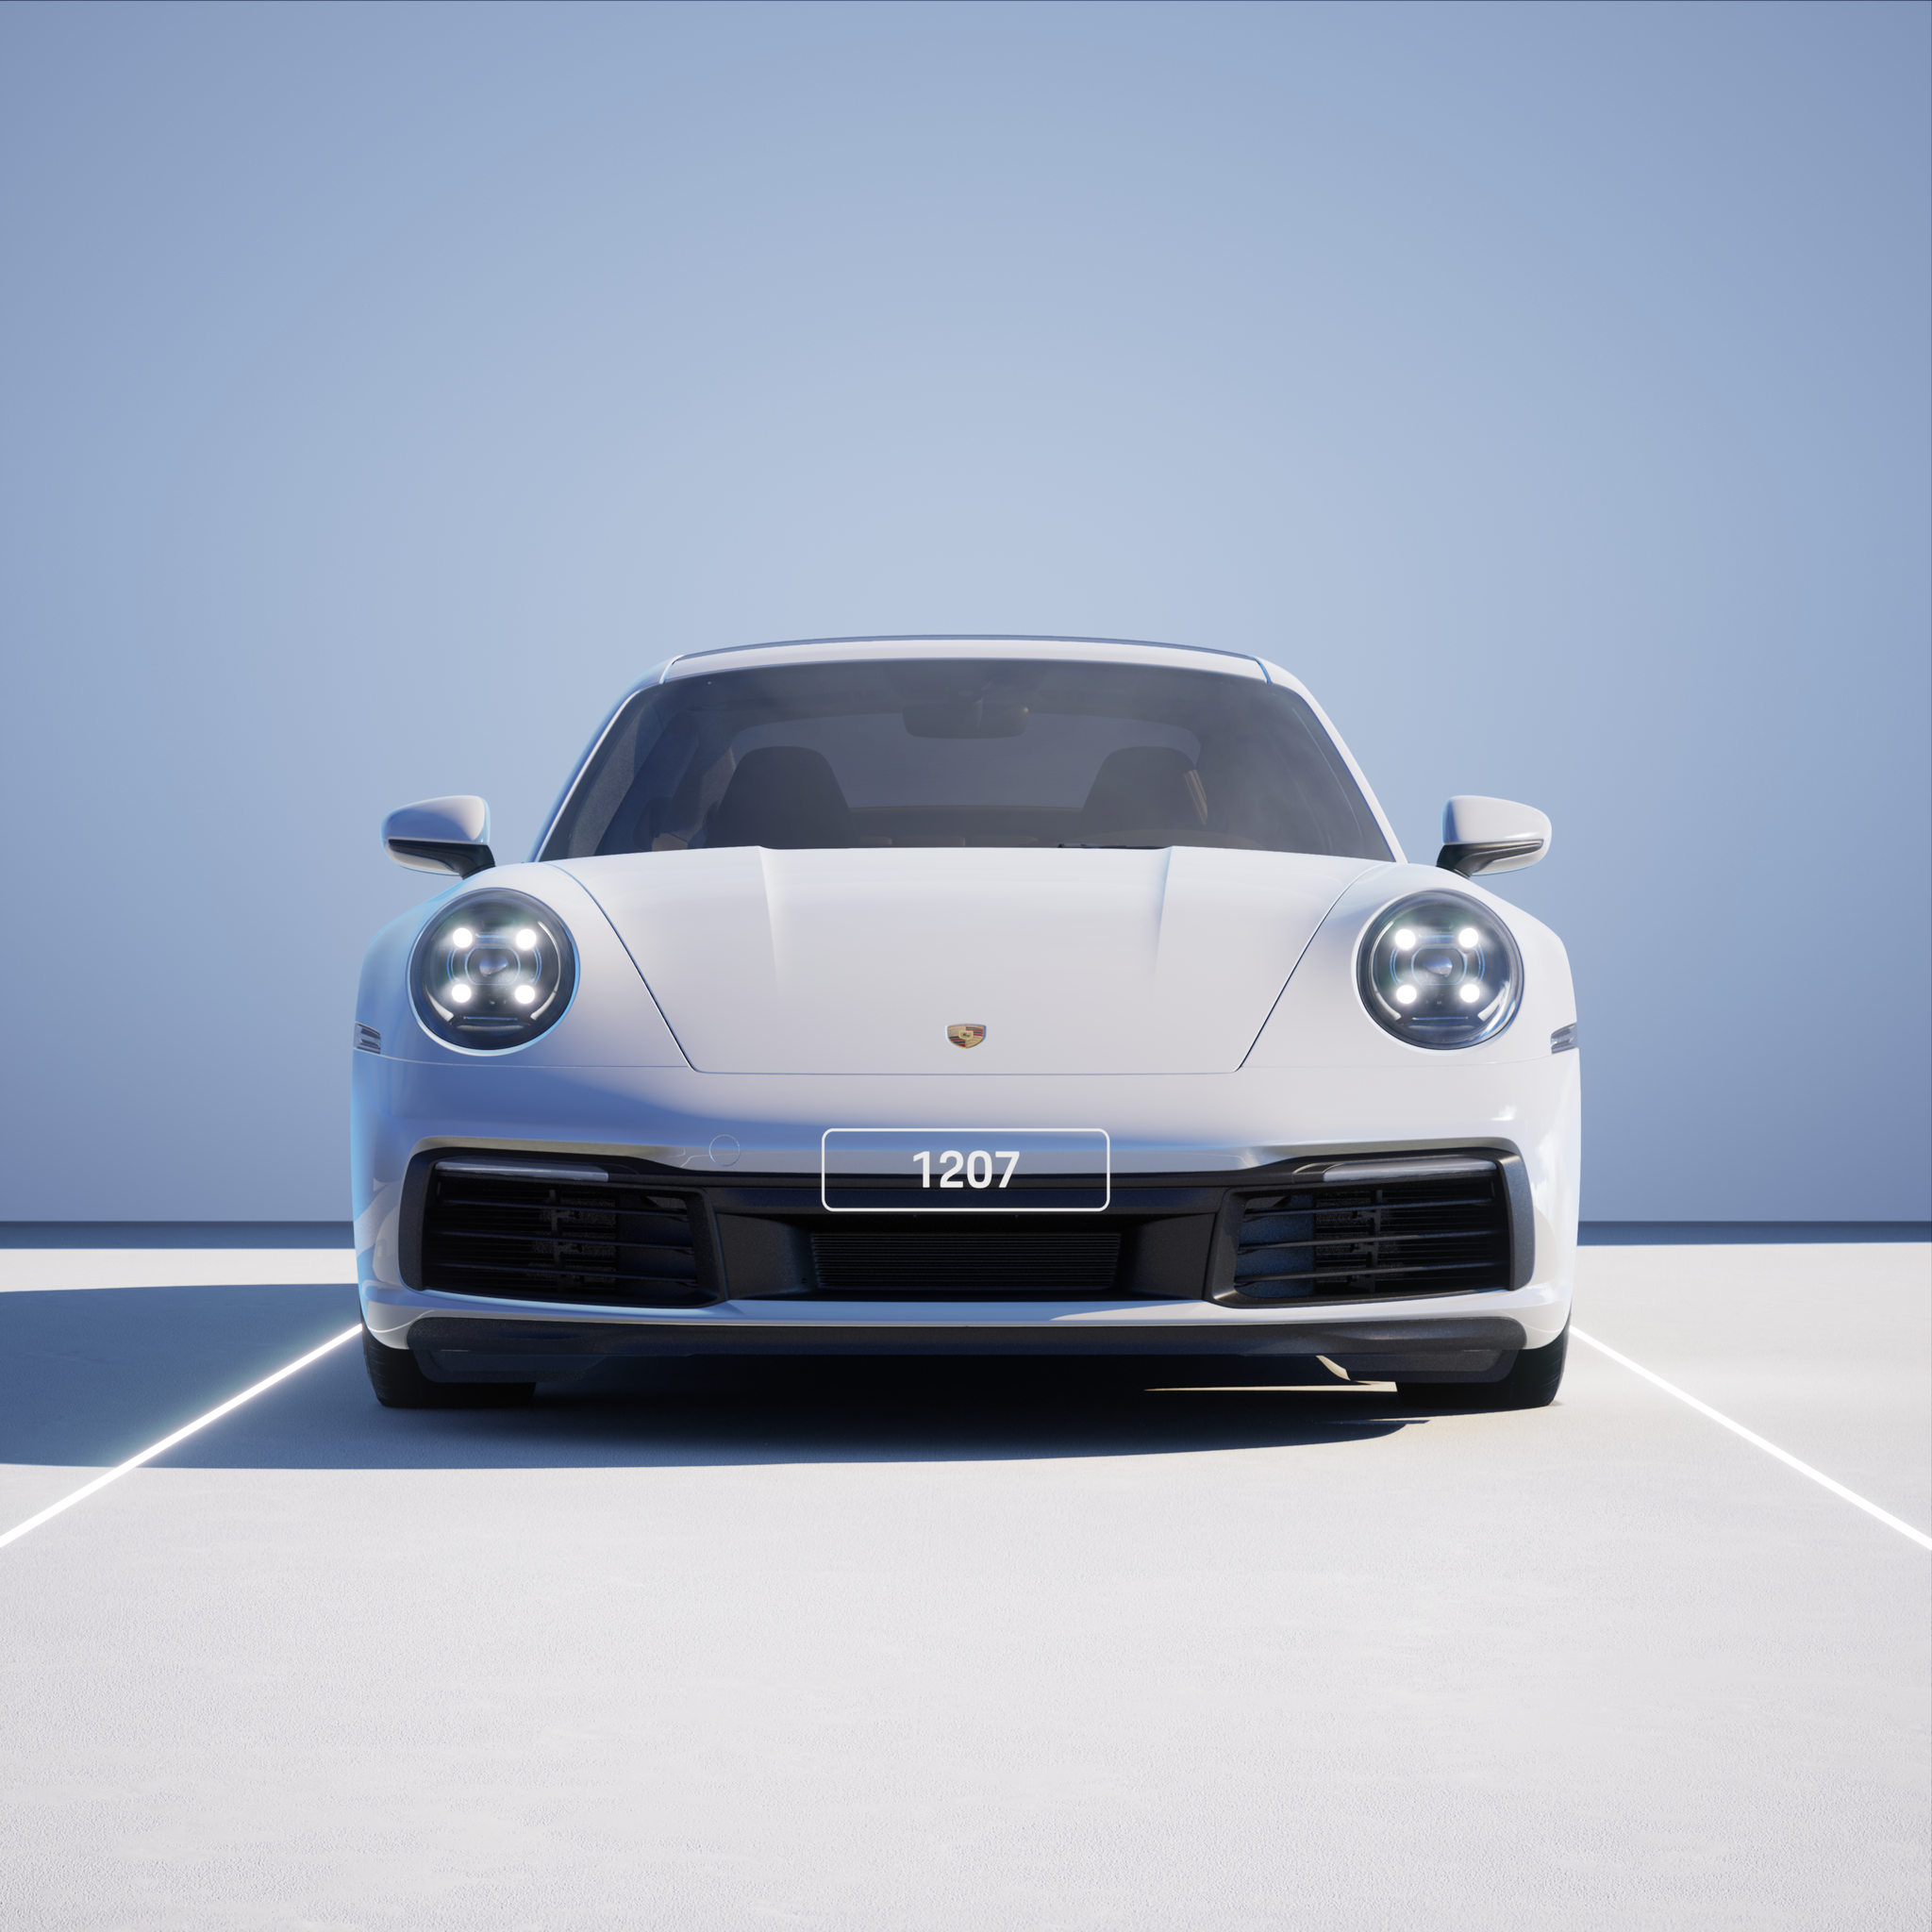 The PORSCHΞ 911 1207 image in phase